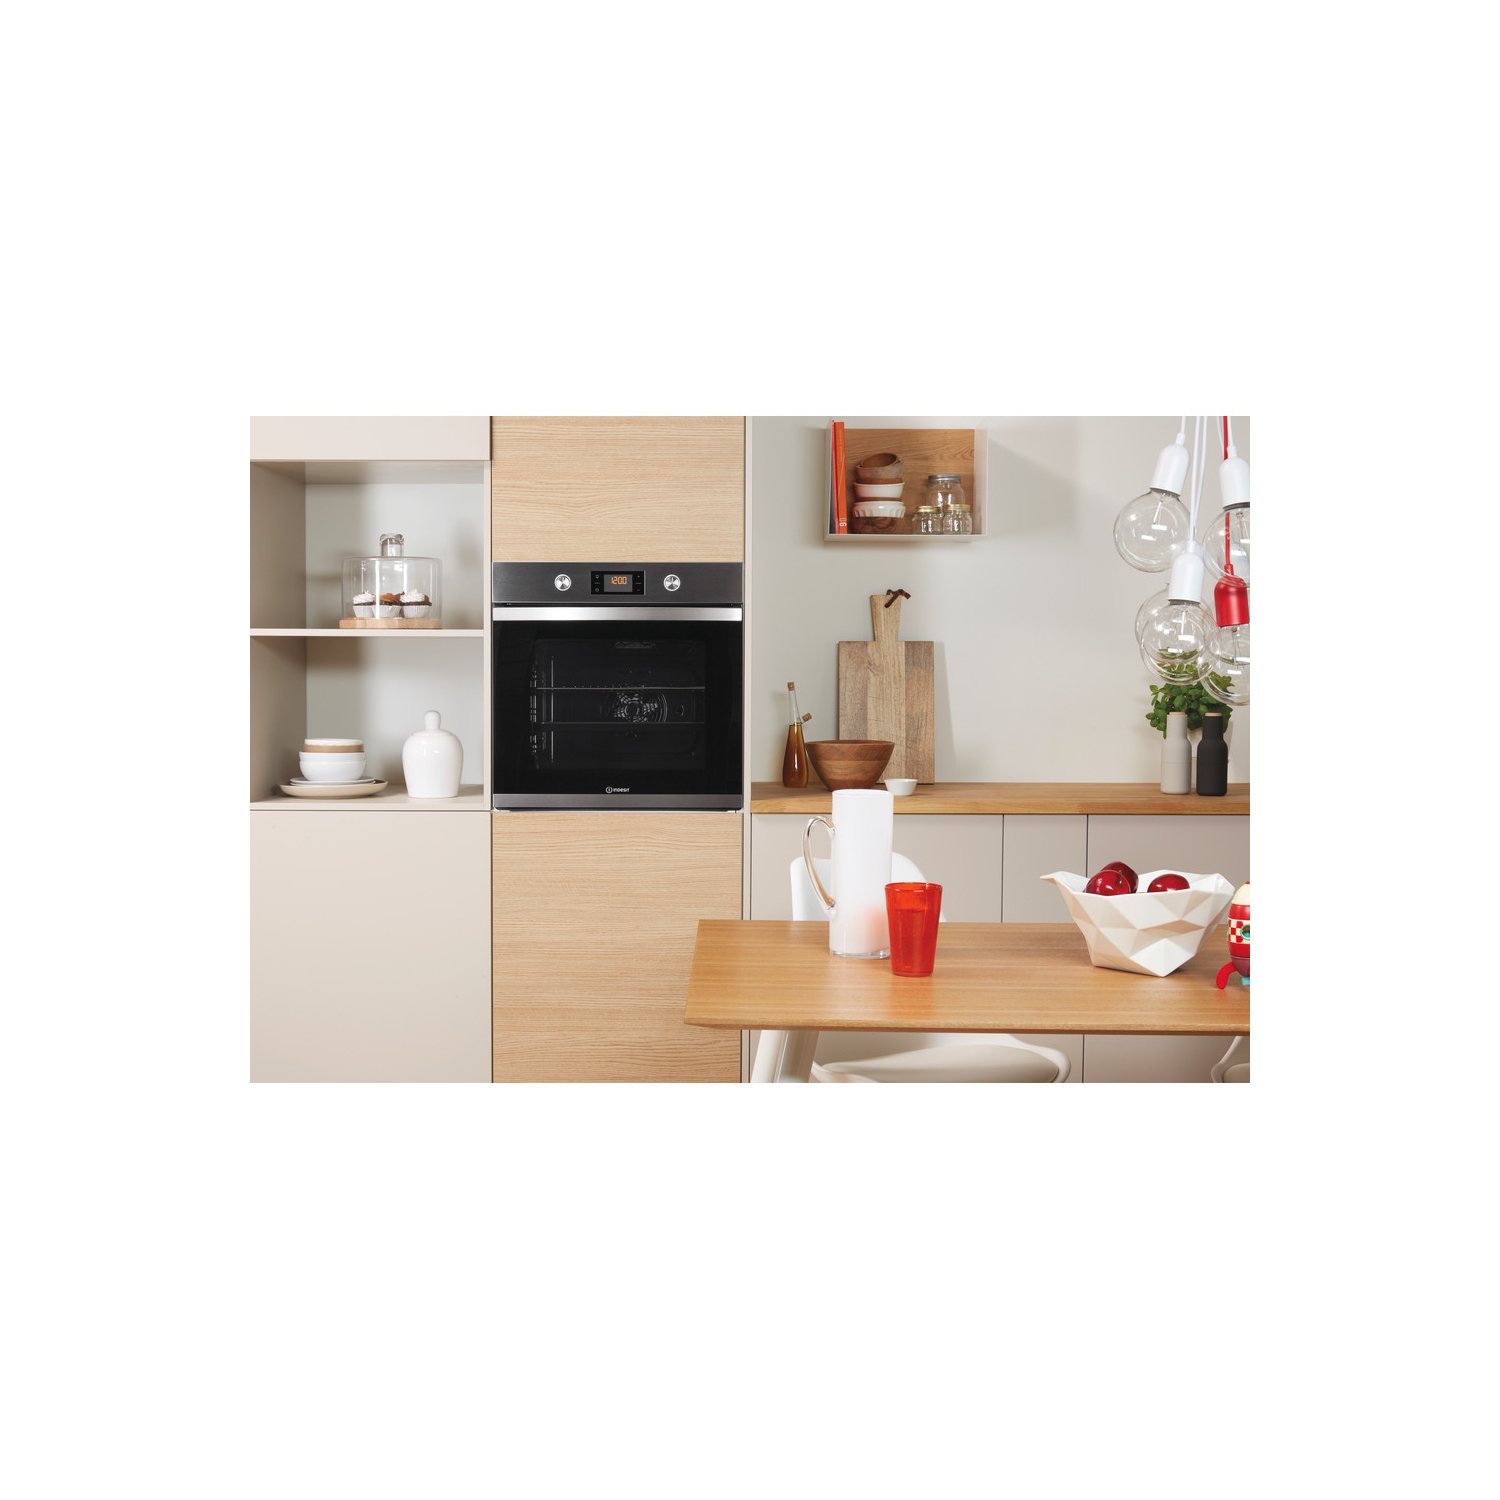 Indesit Built In Electric Single Oven - Stainless Steel - A+ Rated - 13